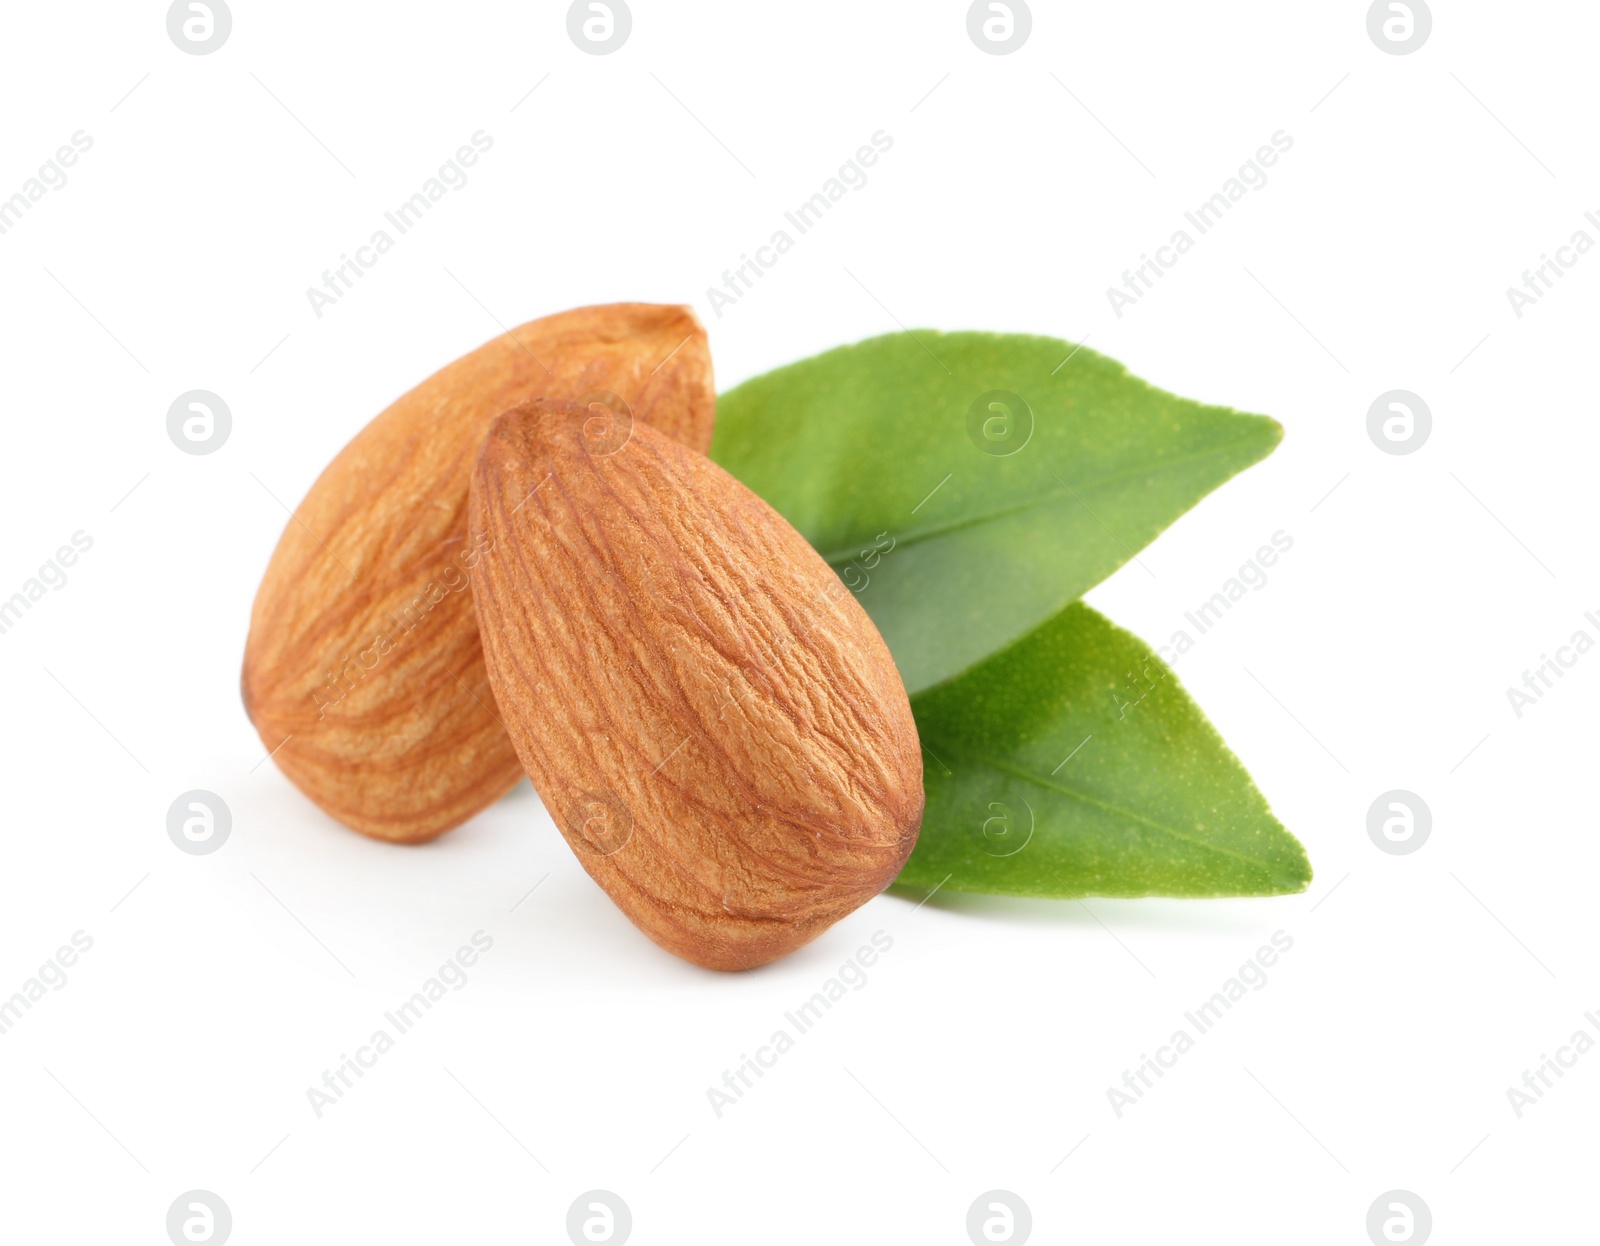 Photo of Organic almond nuts and green leaves on white background. Healthy snack